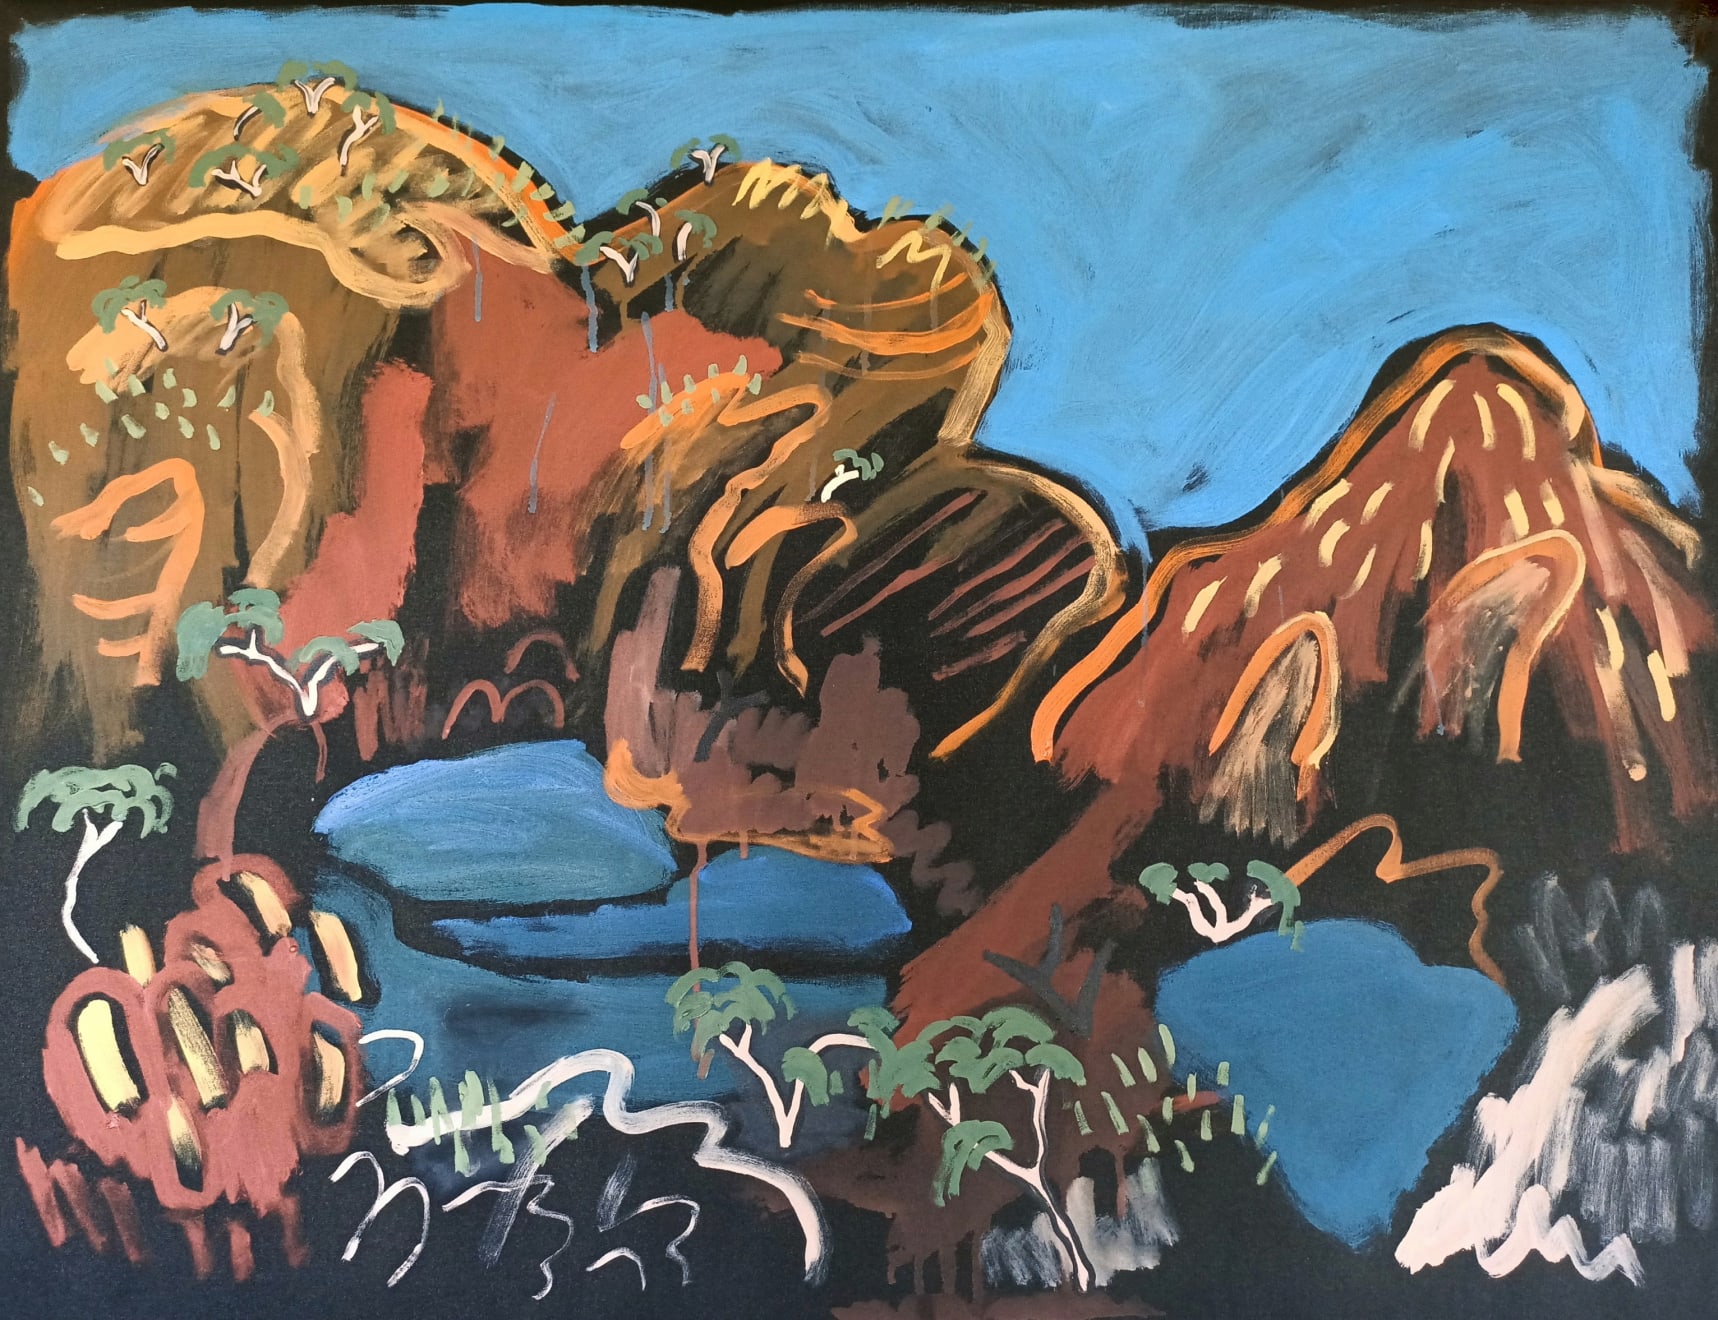 Chain of ponds (atneperrke) trail, waterhole Acrylic on Canvas Original 110 x 80 cm AUD $2100 GBP £1065 SOLD